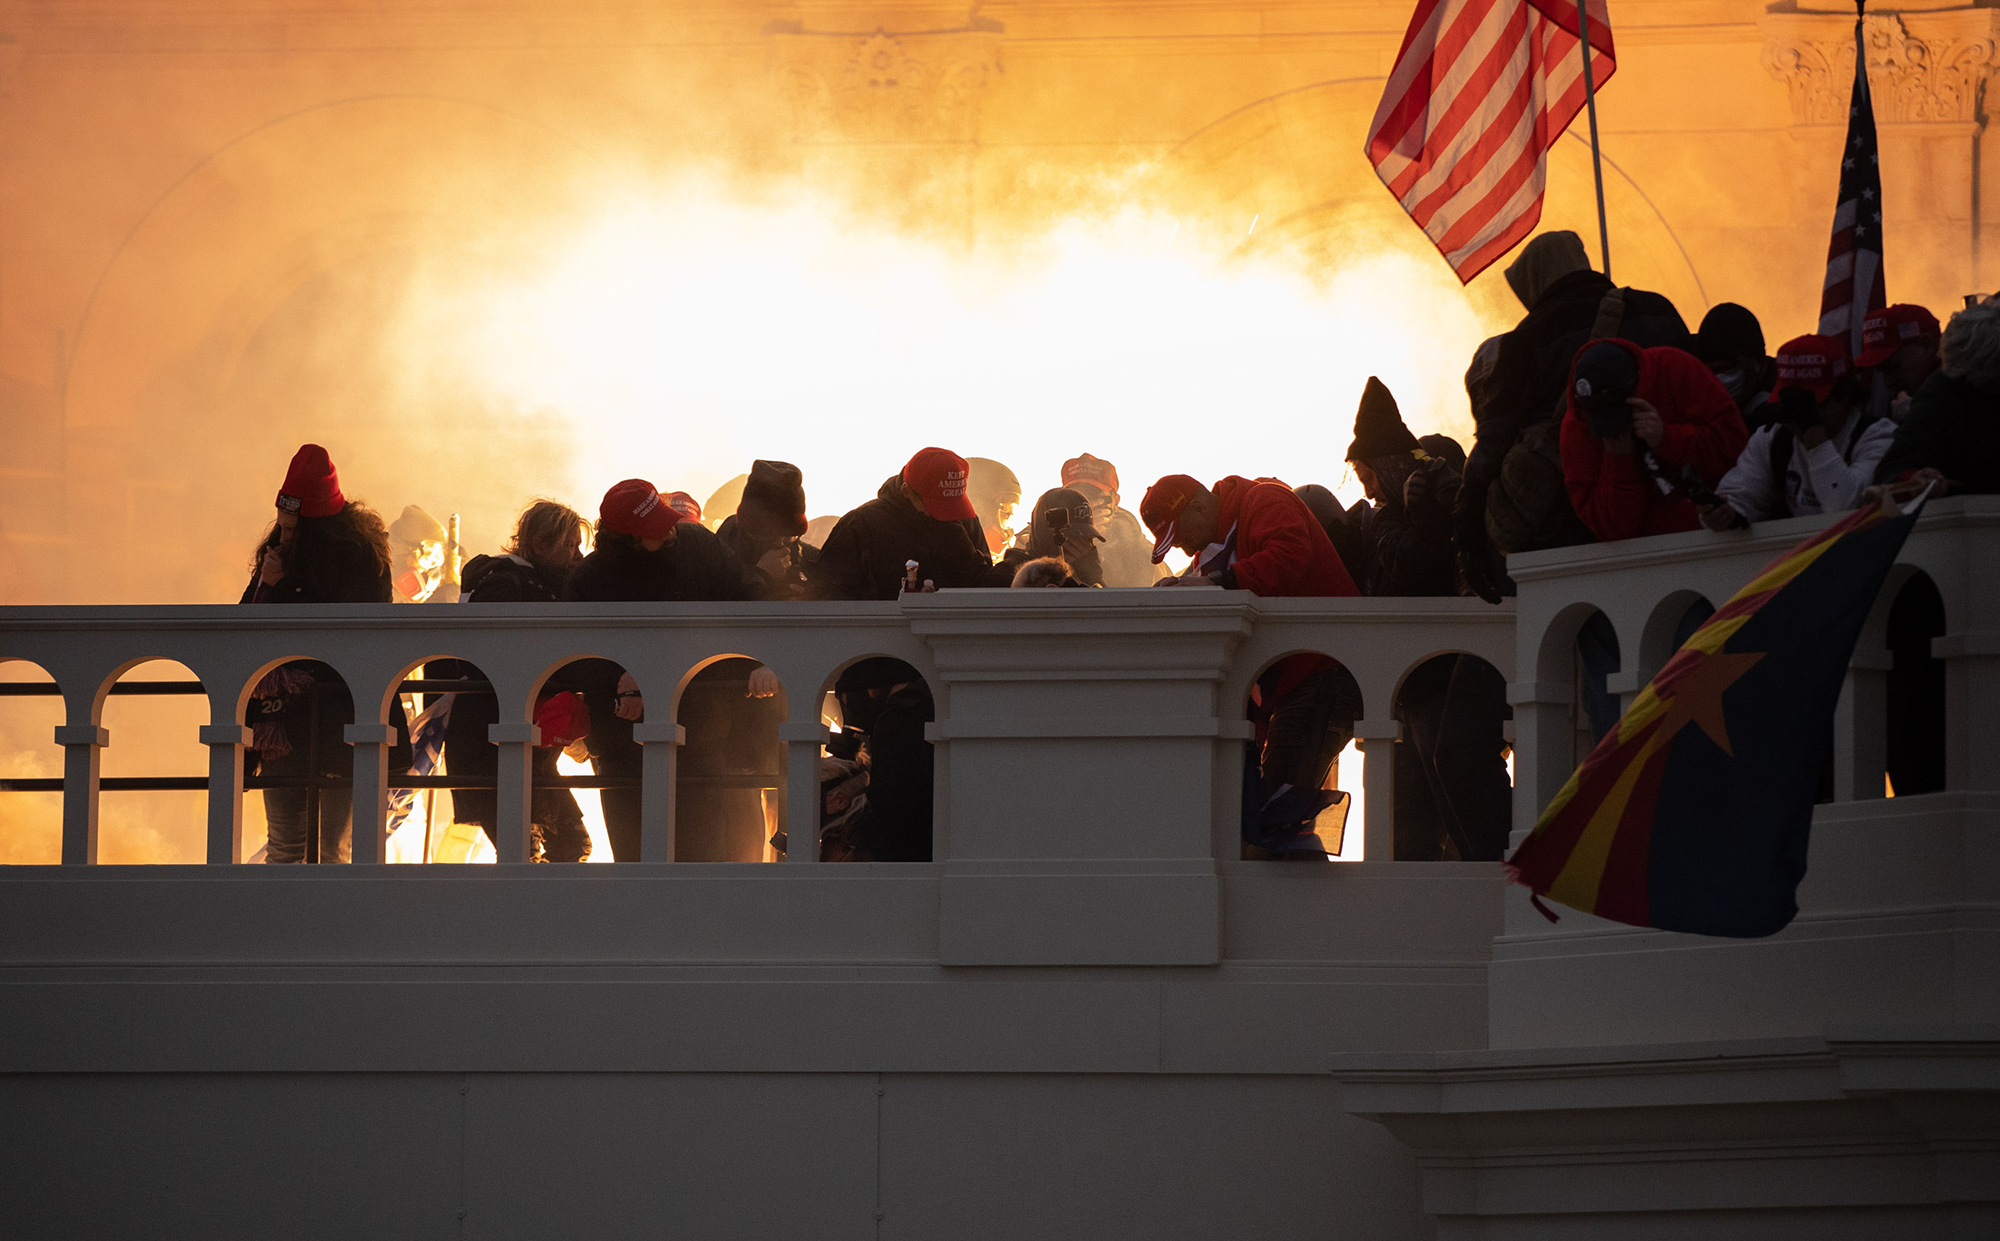 PHOTO: A flash bang is fired at supporters of President Trump who stormed the United States Capitol building on Jan. 6, 2021.